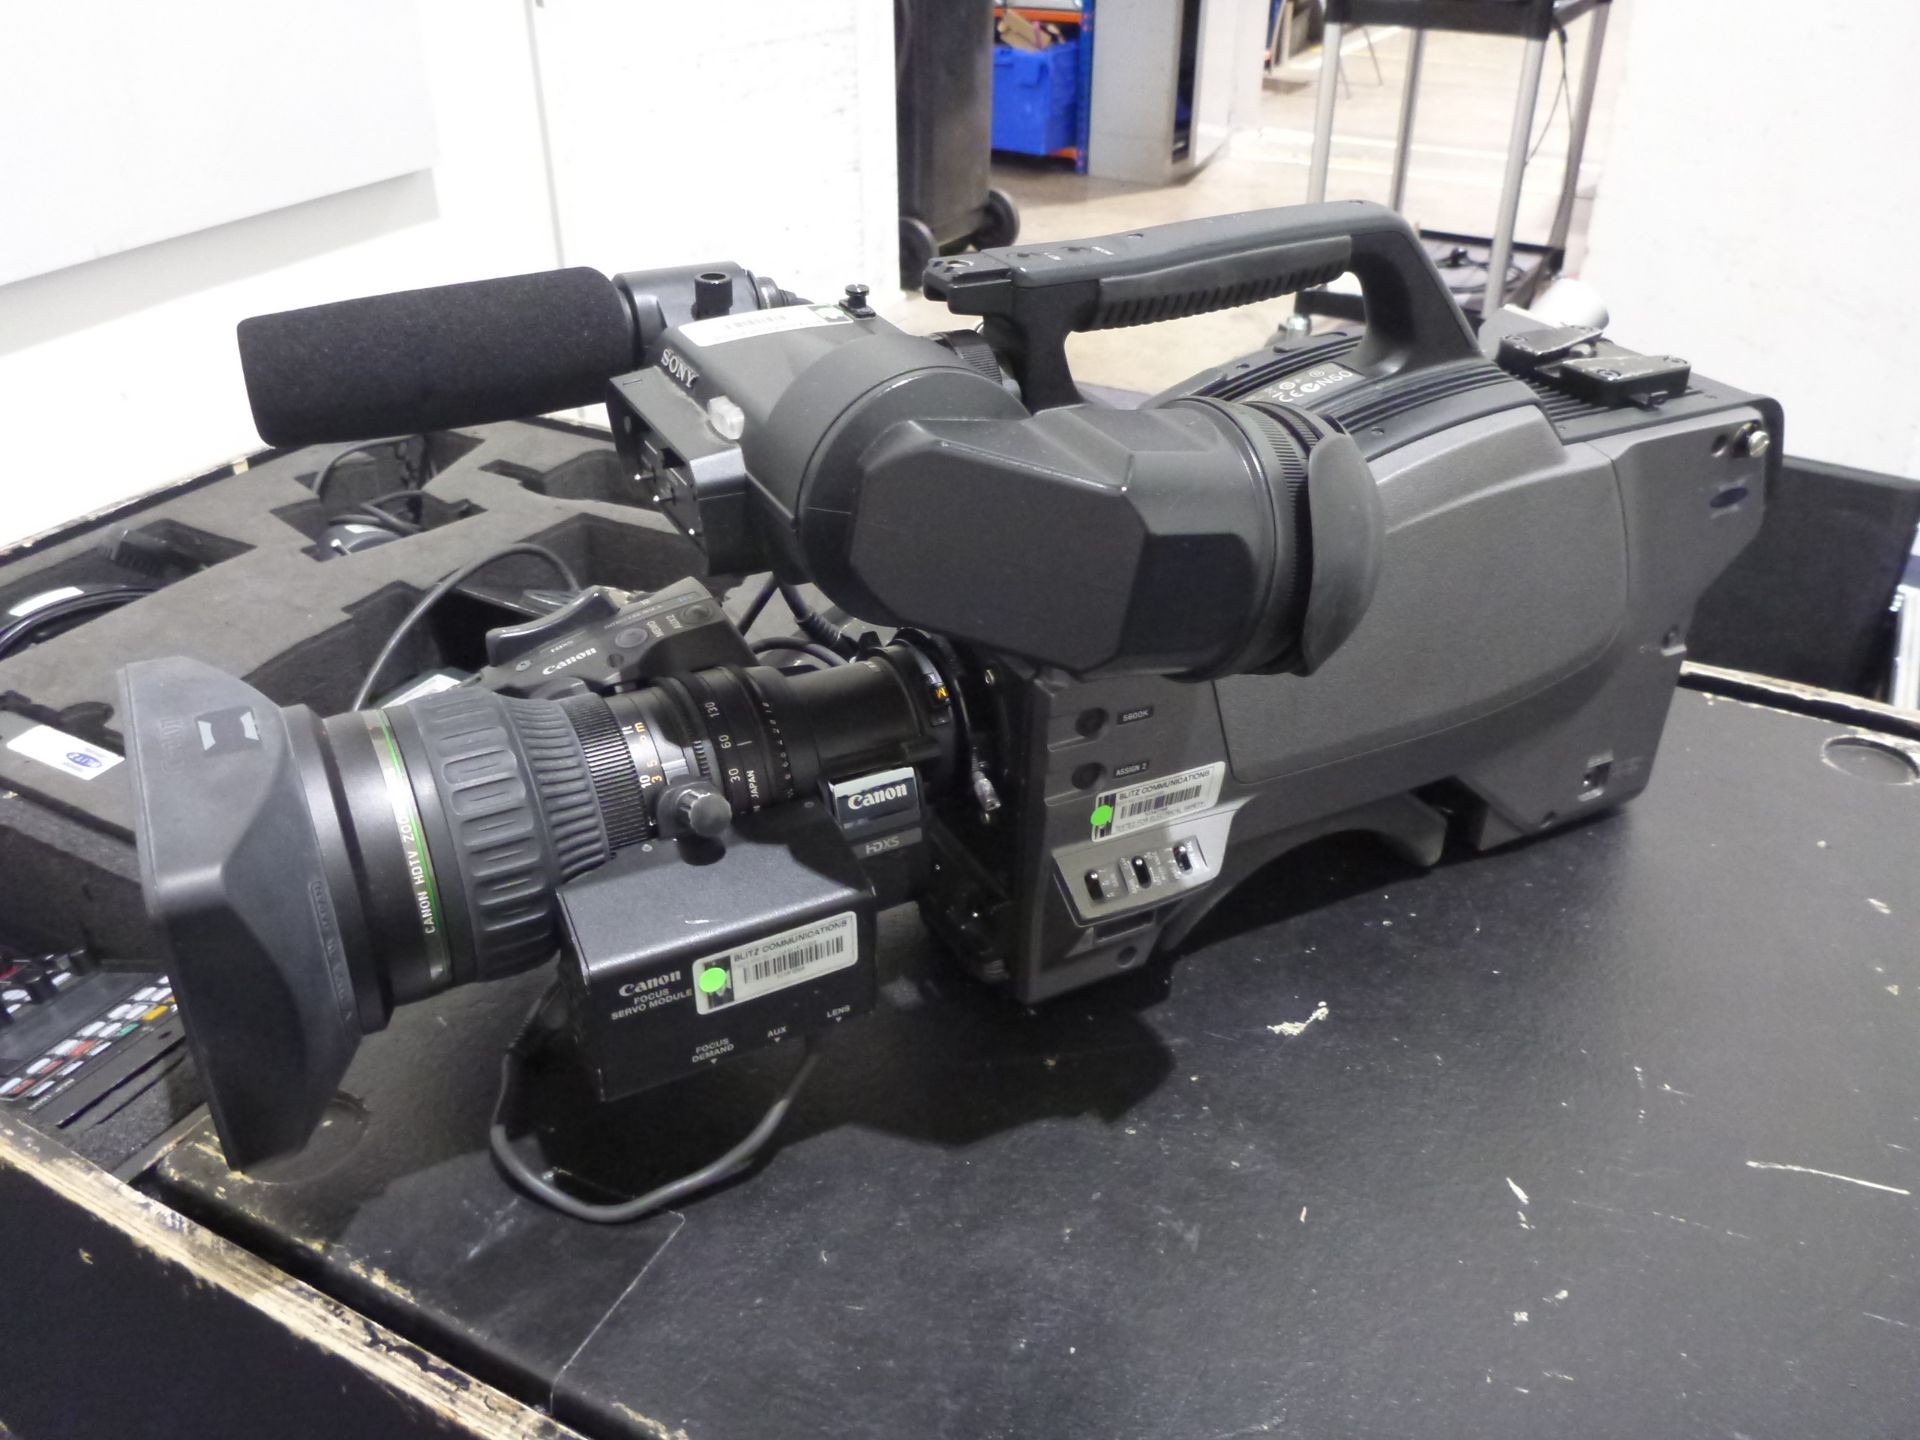 Sony HD Colour Broadcast Camera, Model HXC-100, S/N 40246, Camera includes Canon HDTV zoom lens (